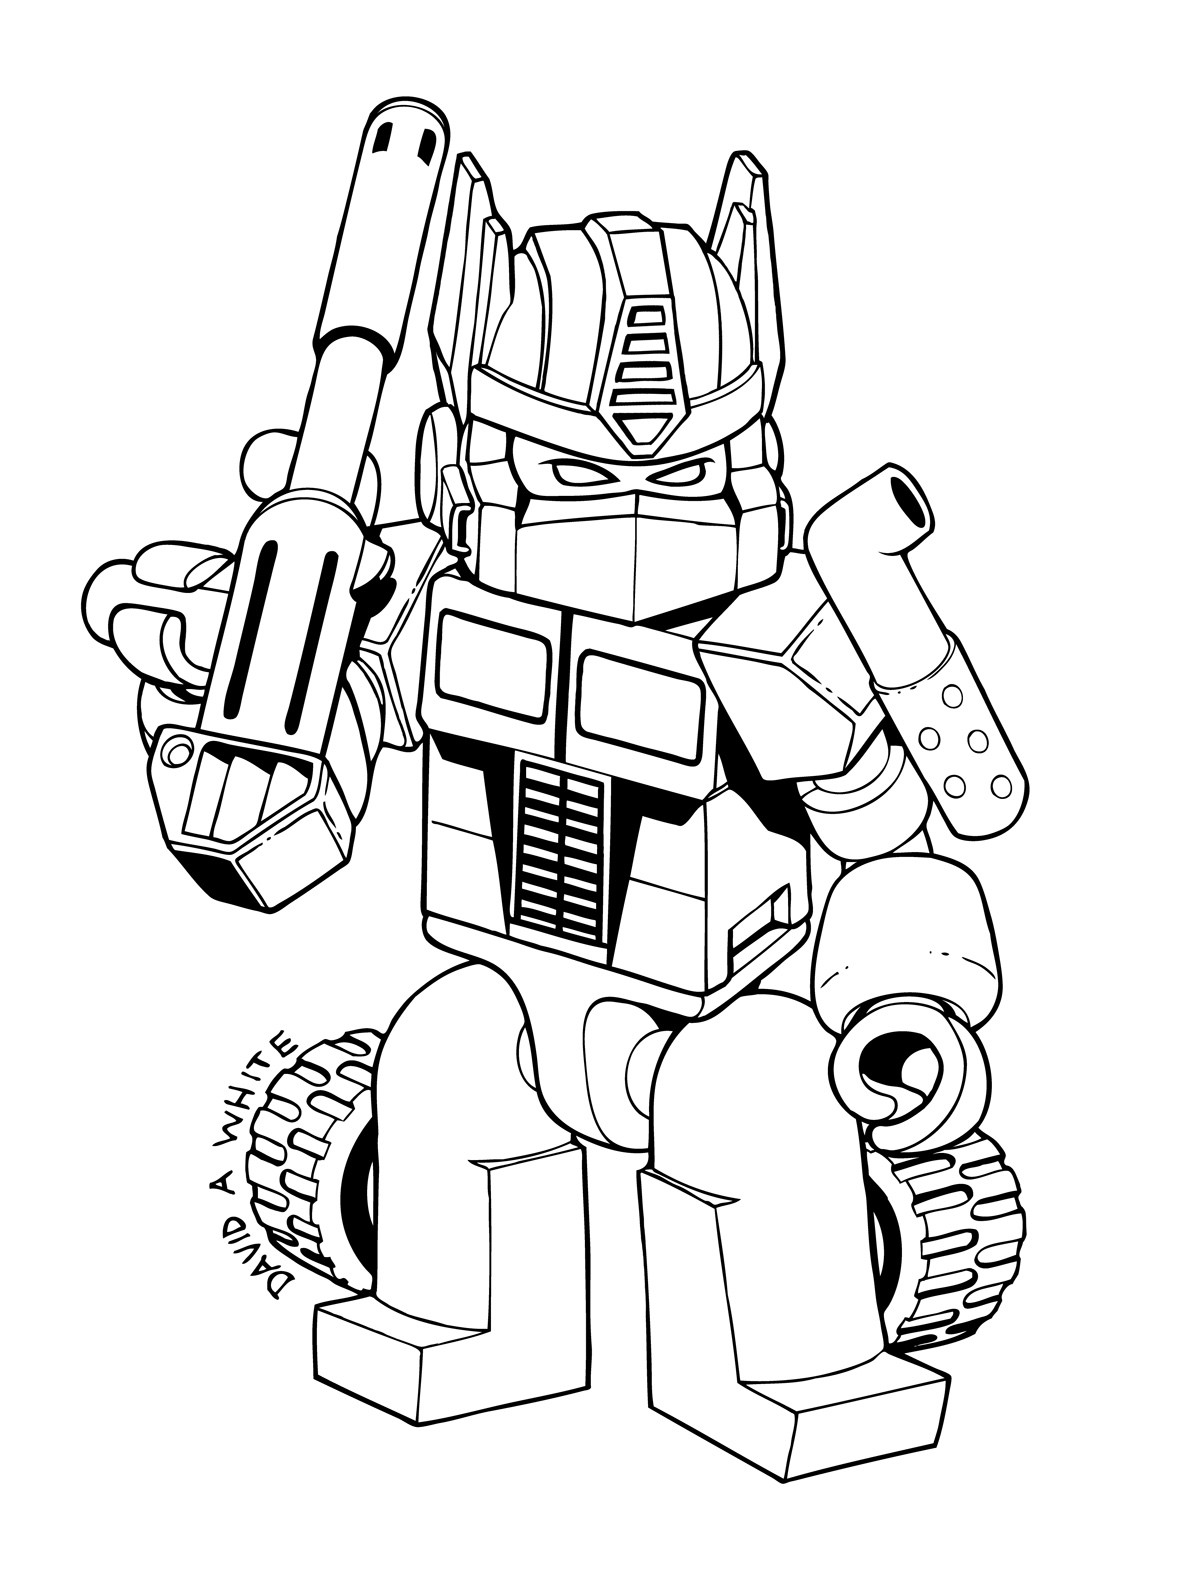 Transformers Coloring Pages For Boys
 Transformers Coloring Pages